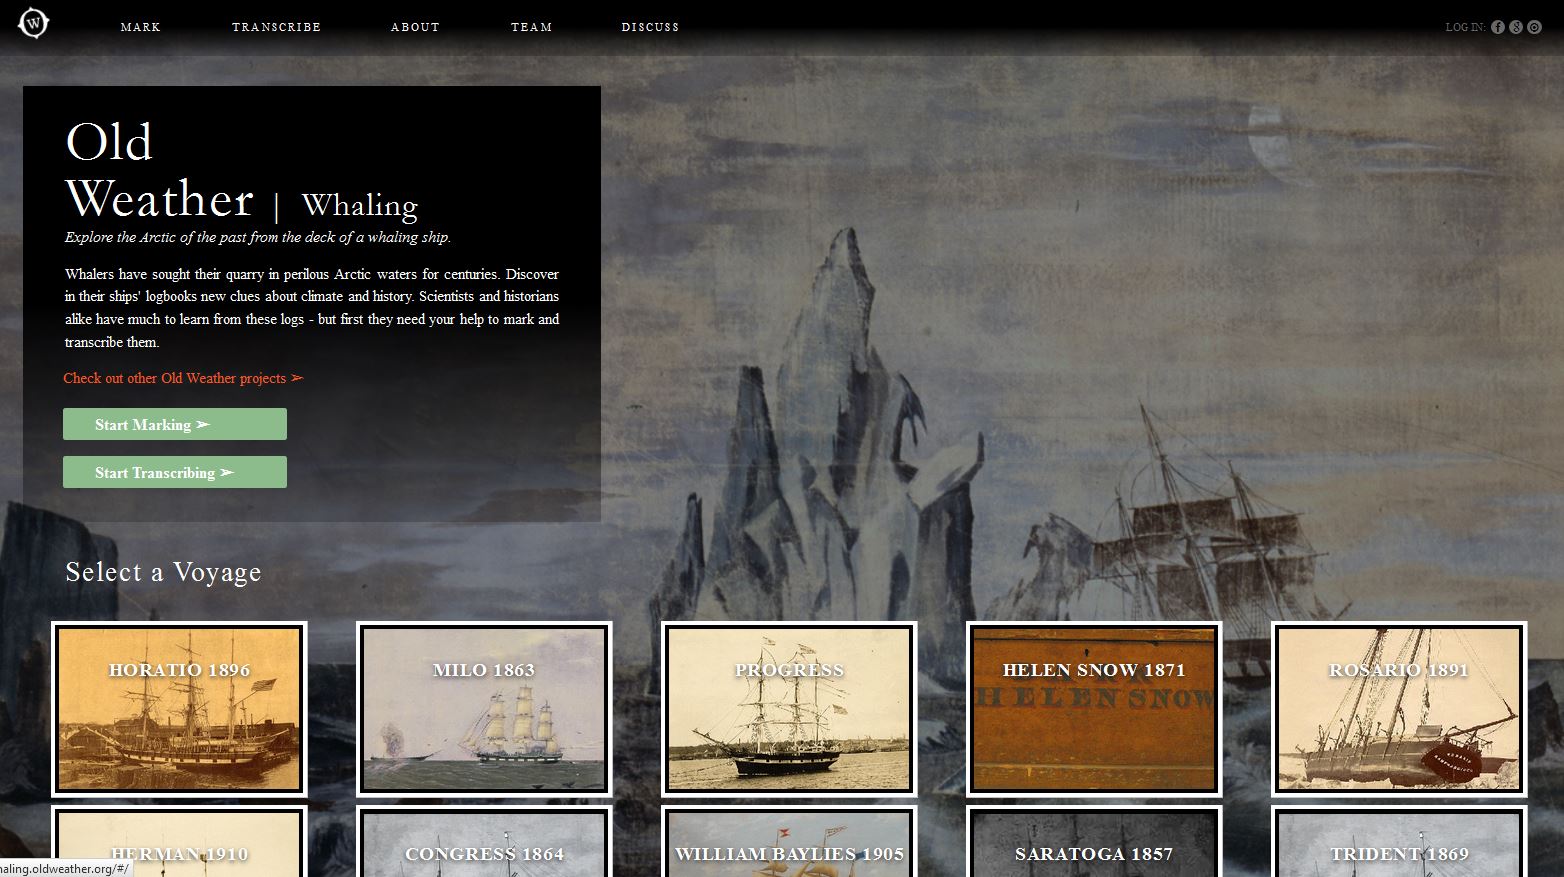 OldWeather.org invites citizen scientists to mark and transcribe ships' logbooks.